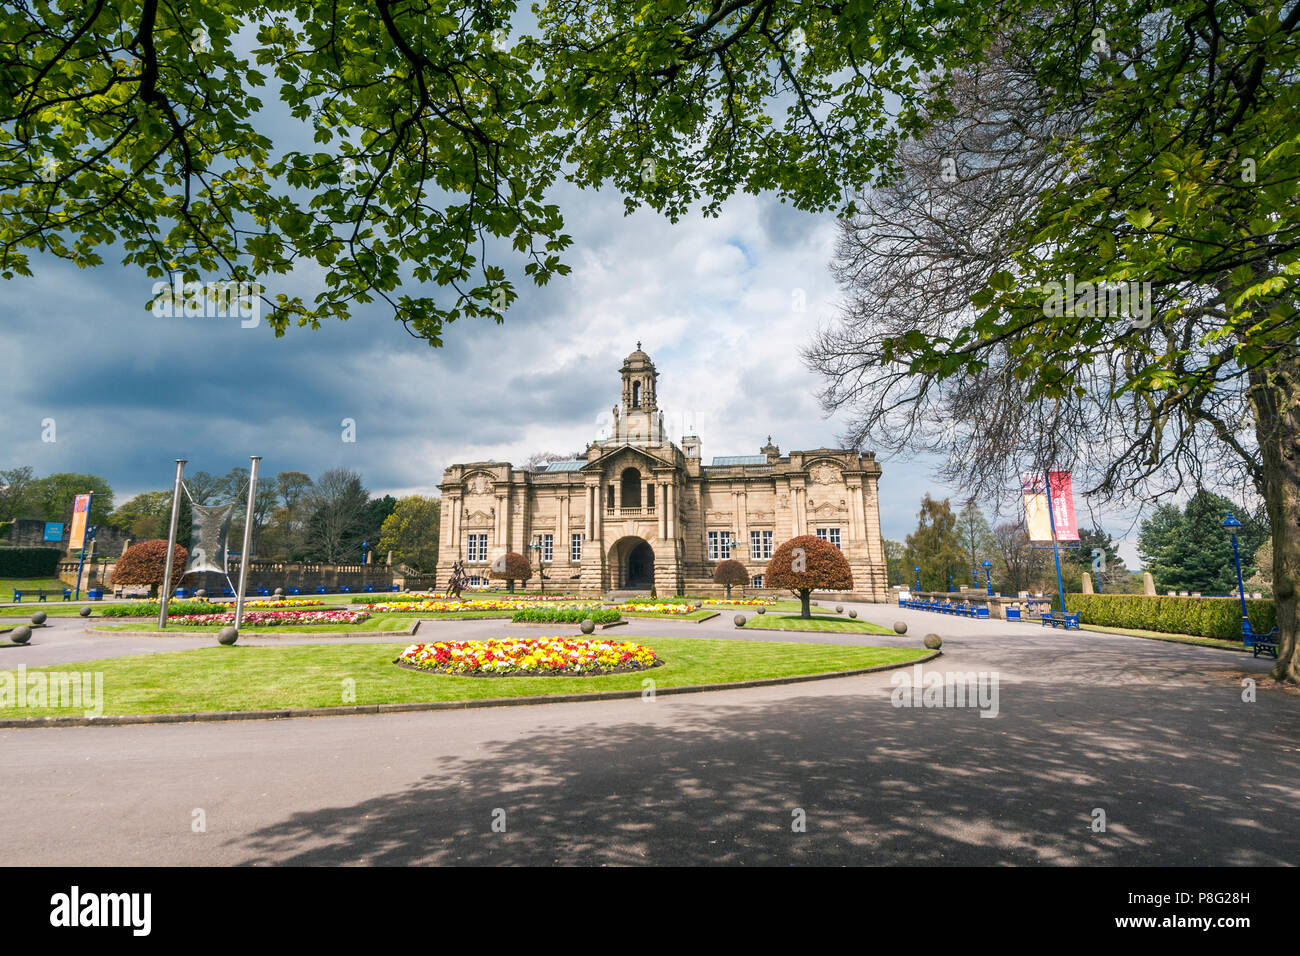 cartwright hall situated in lister park along manningham lane in the heaton area of bradford Stock Photo